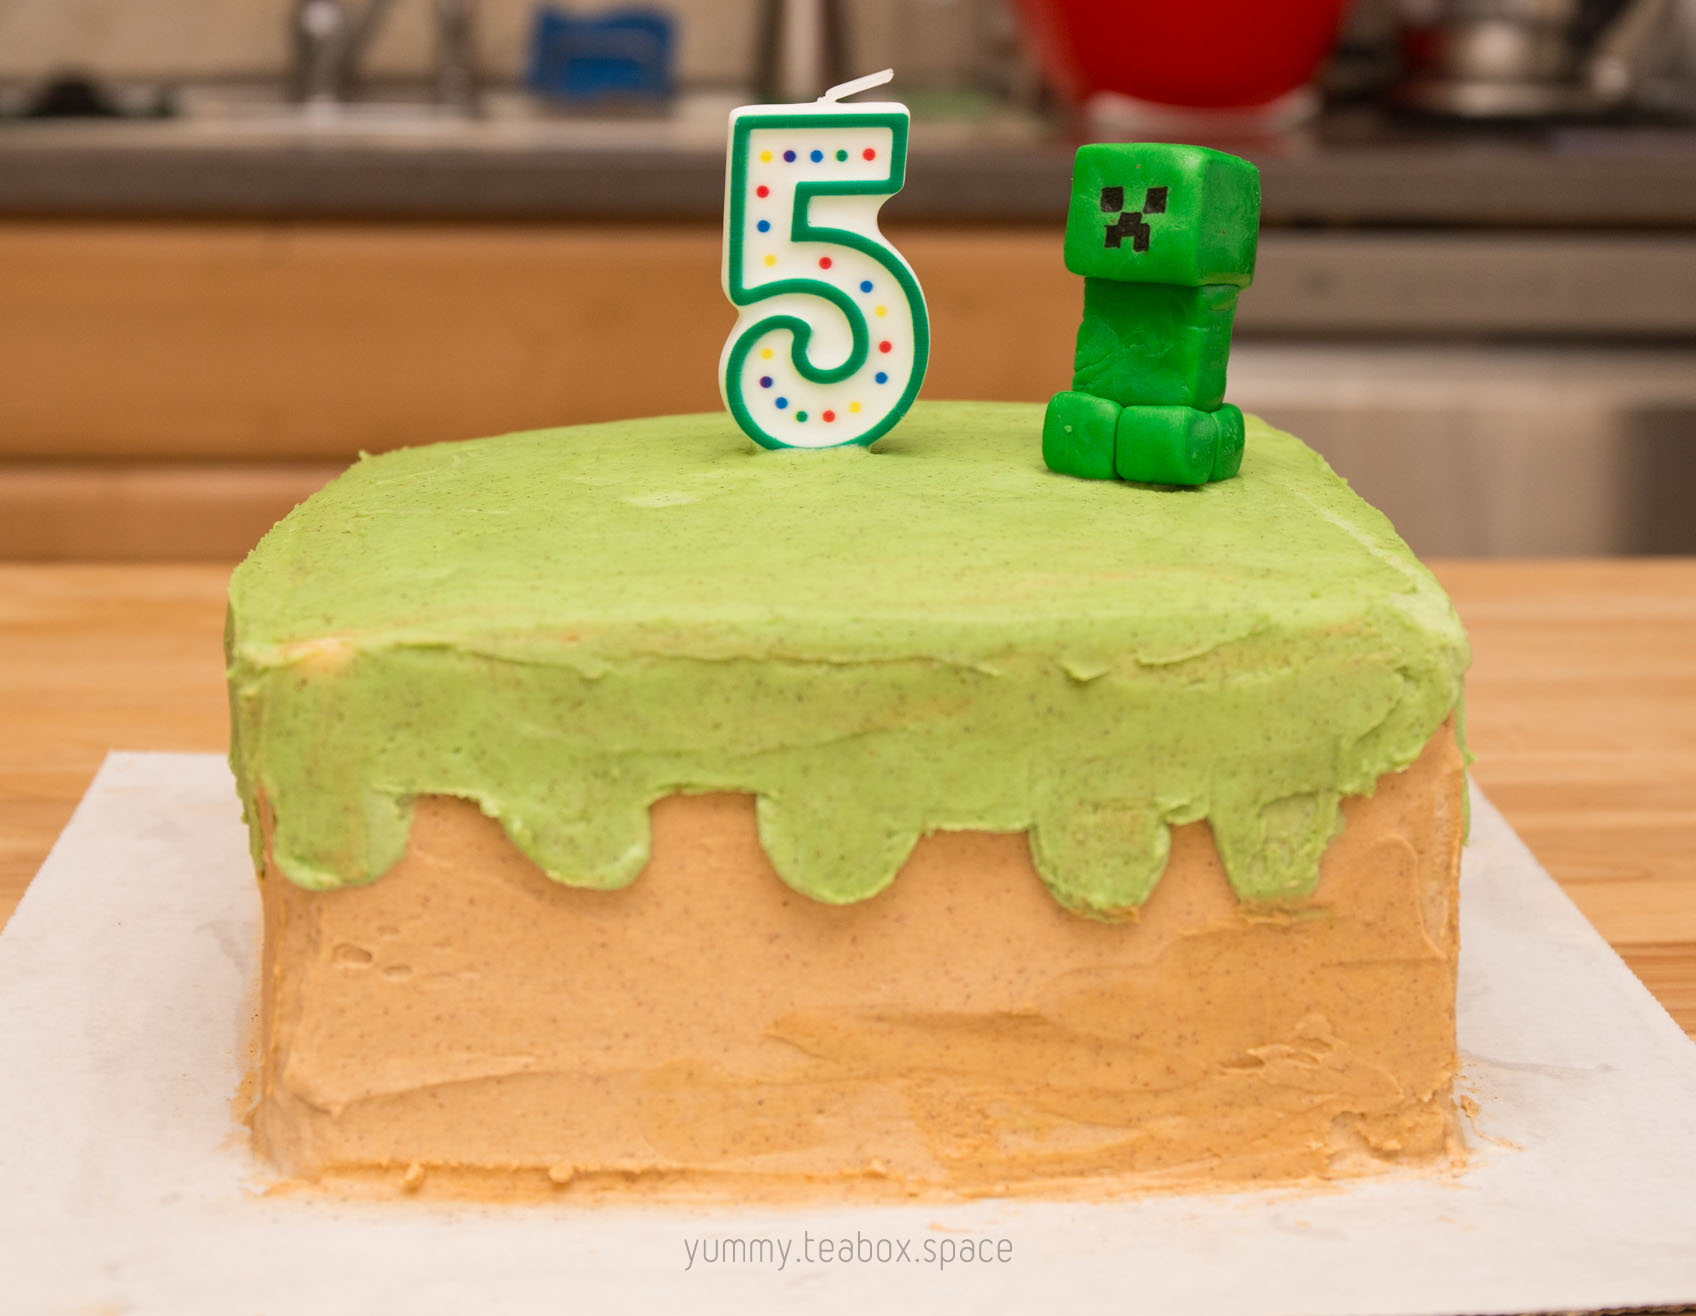 Cake that looks like a Minecraft grass block with brown dirt on the bottom and green grass on top. A Creeper sits on top with a 5 candle.